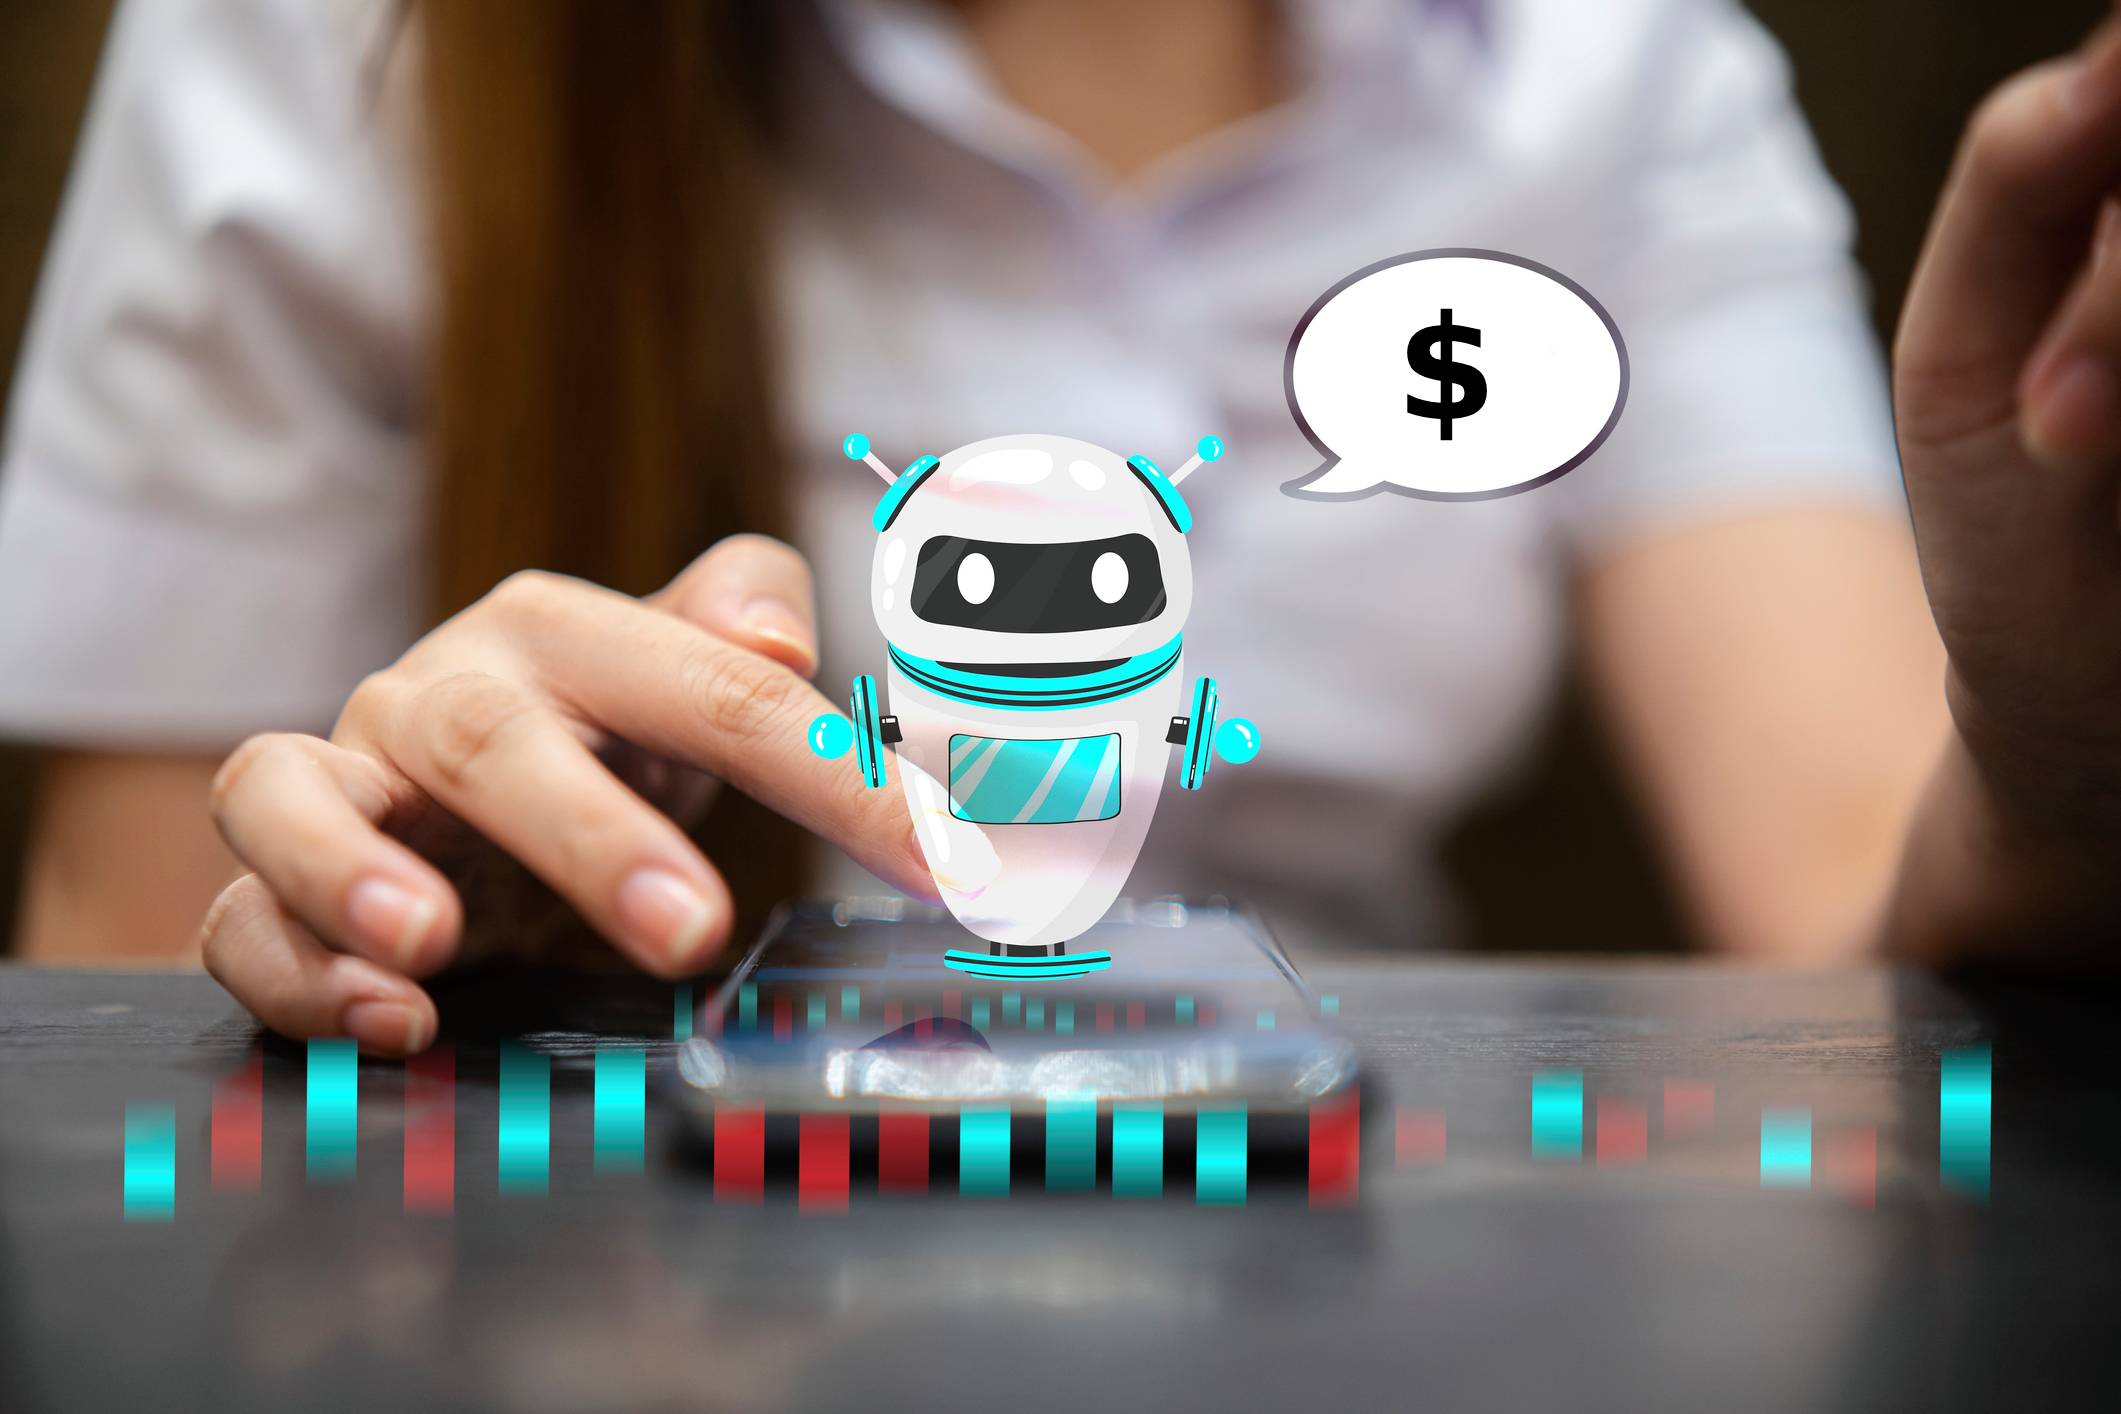 How to incentivize prompt automated payment using chatbots?